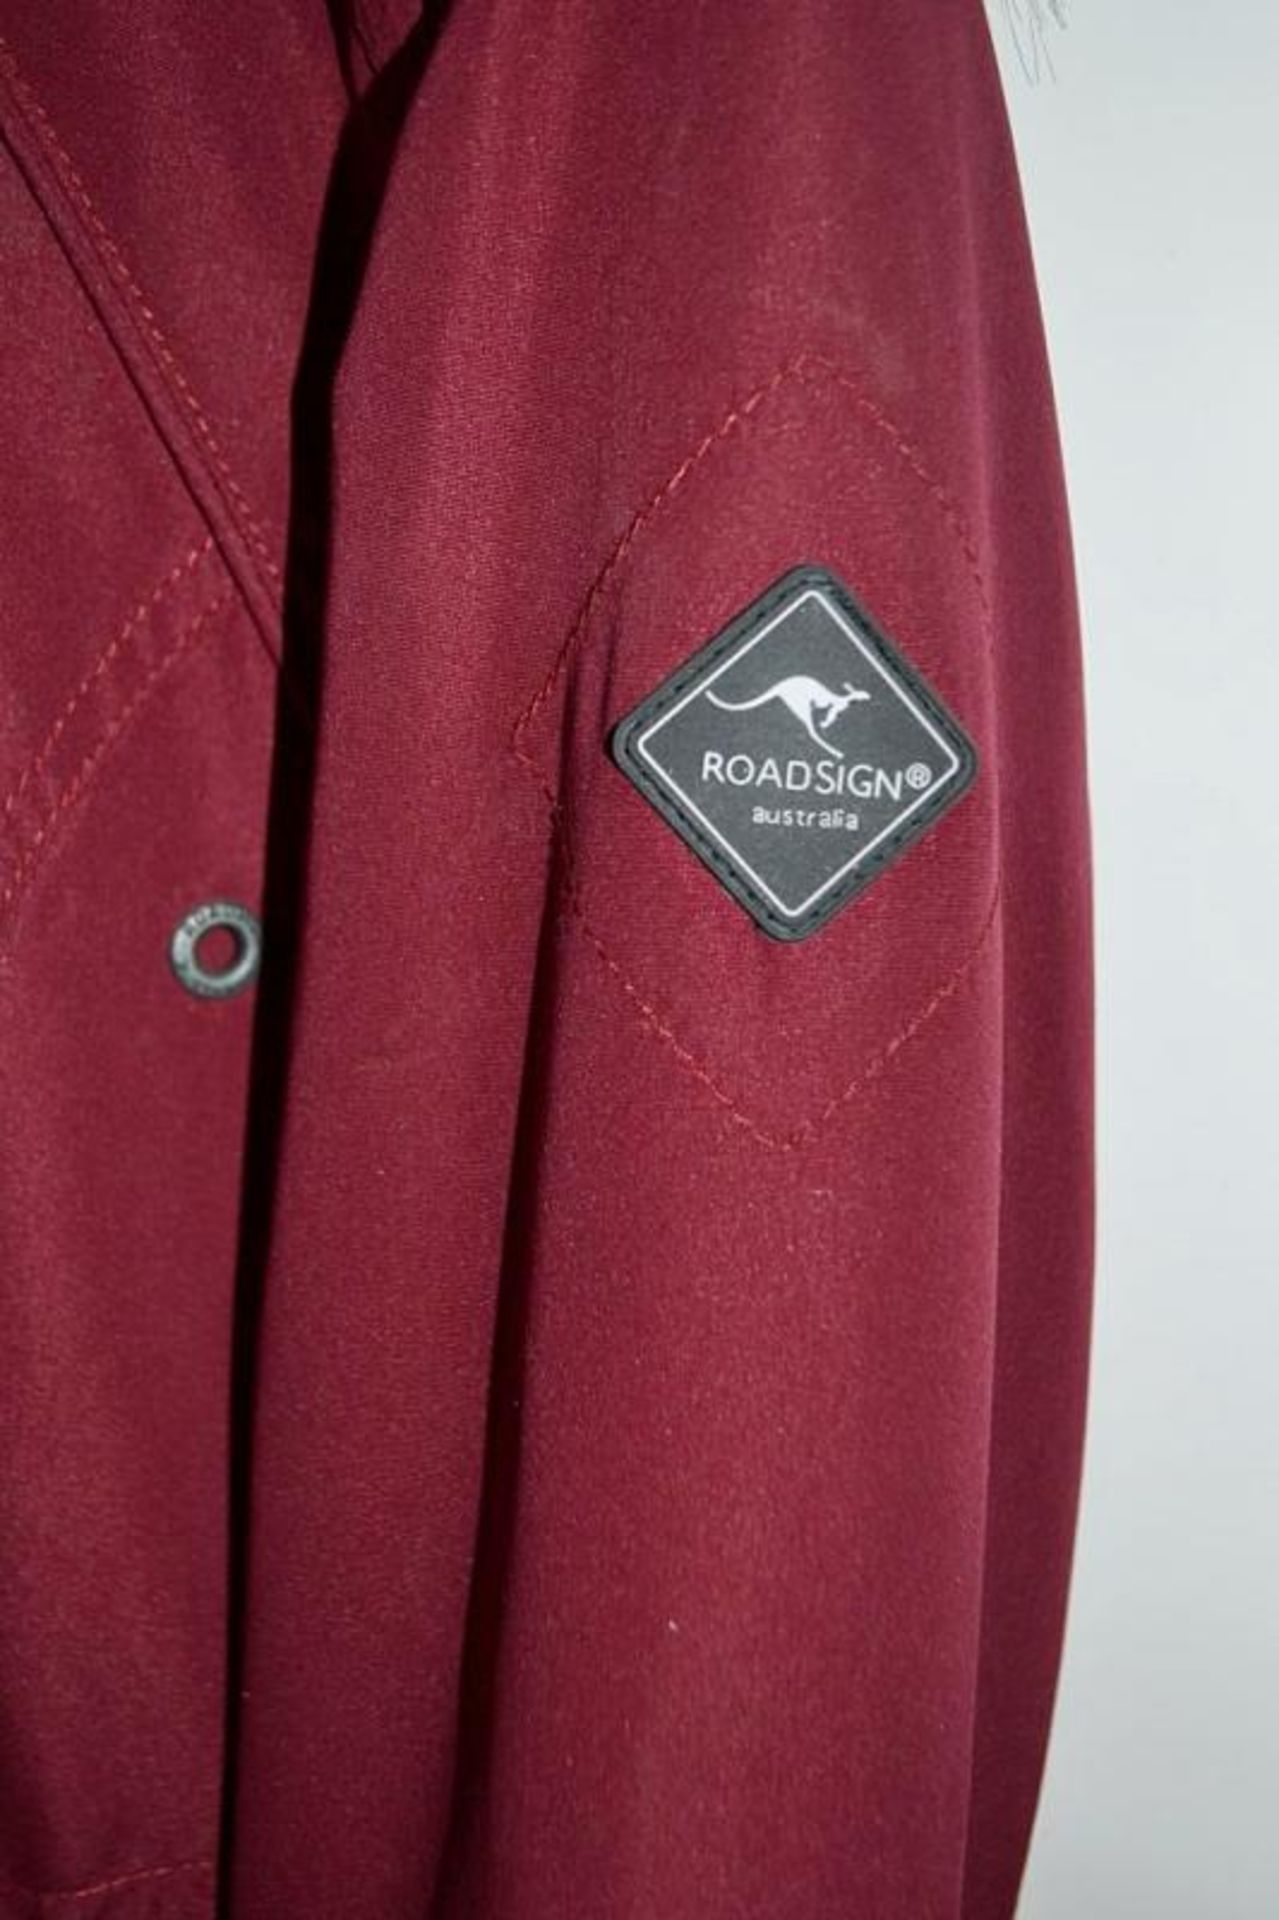 1 x Premium Branded Womens Winter Coat - Wind Proof & Water Resistant - Colour: Burgundy - UK Size 1 - Image 3 of 14